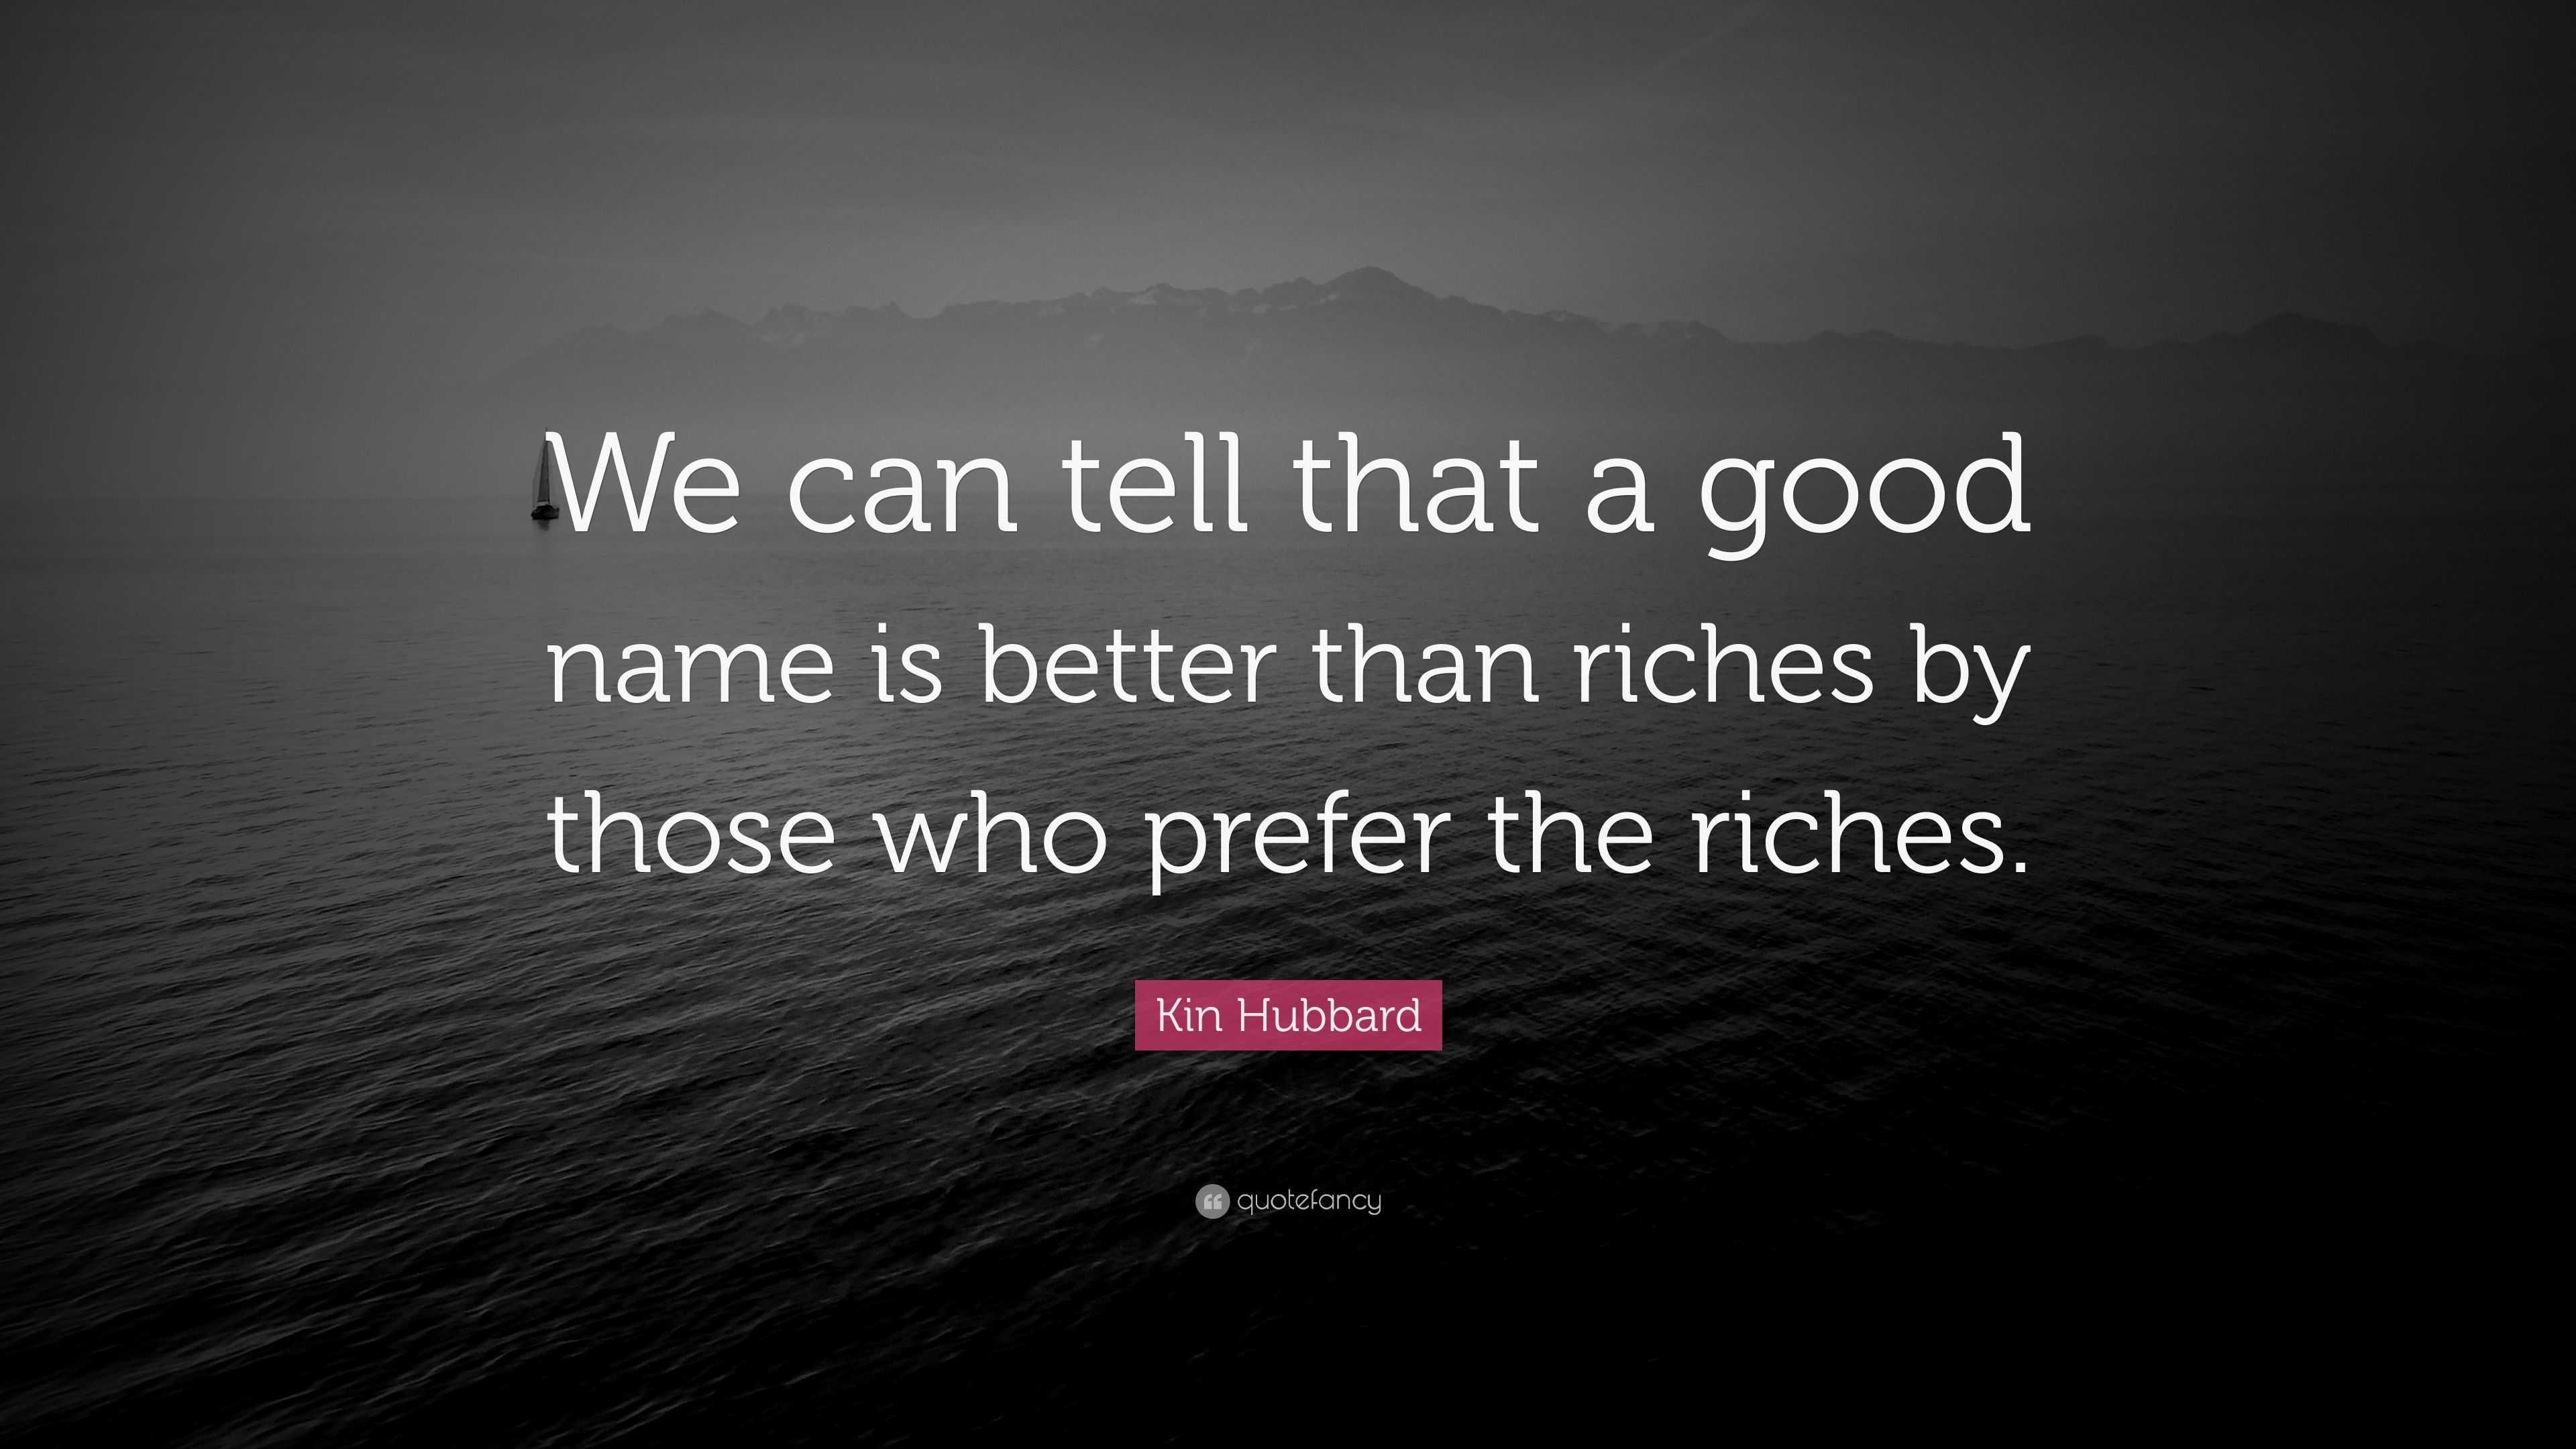 essay a good name is better than riches